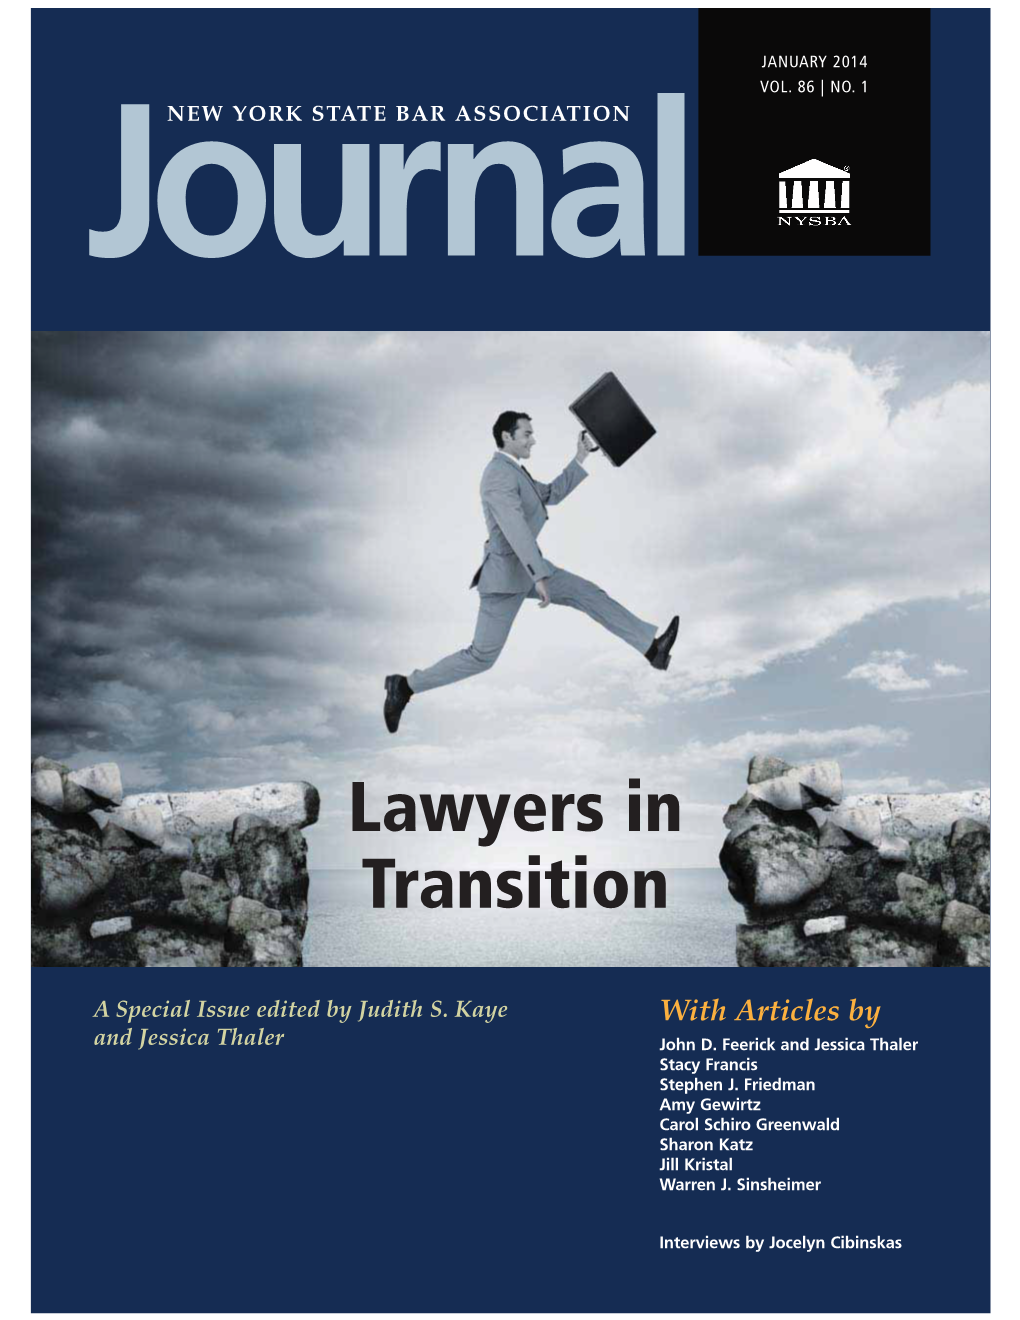 Lawyers in Transition